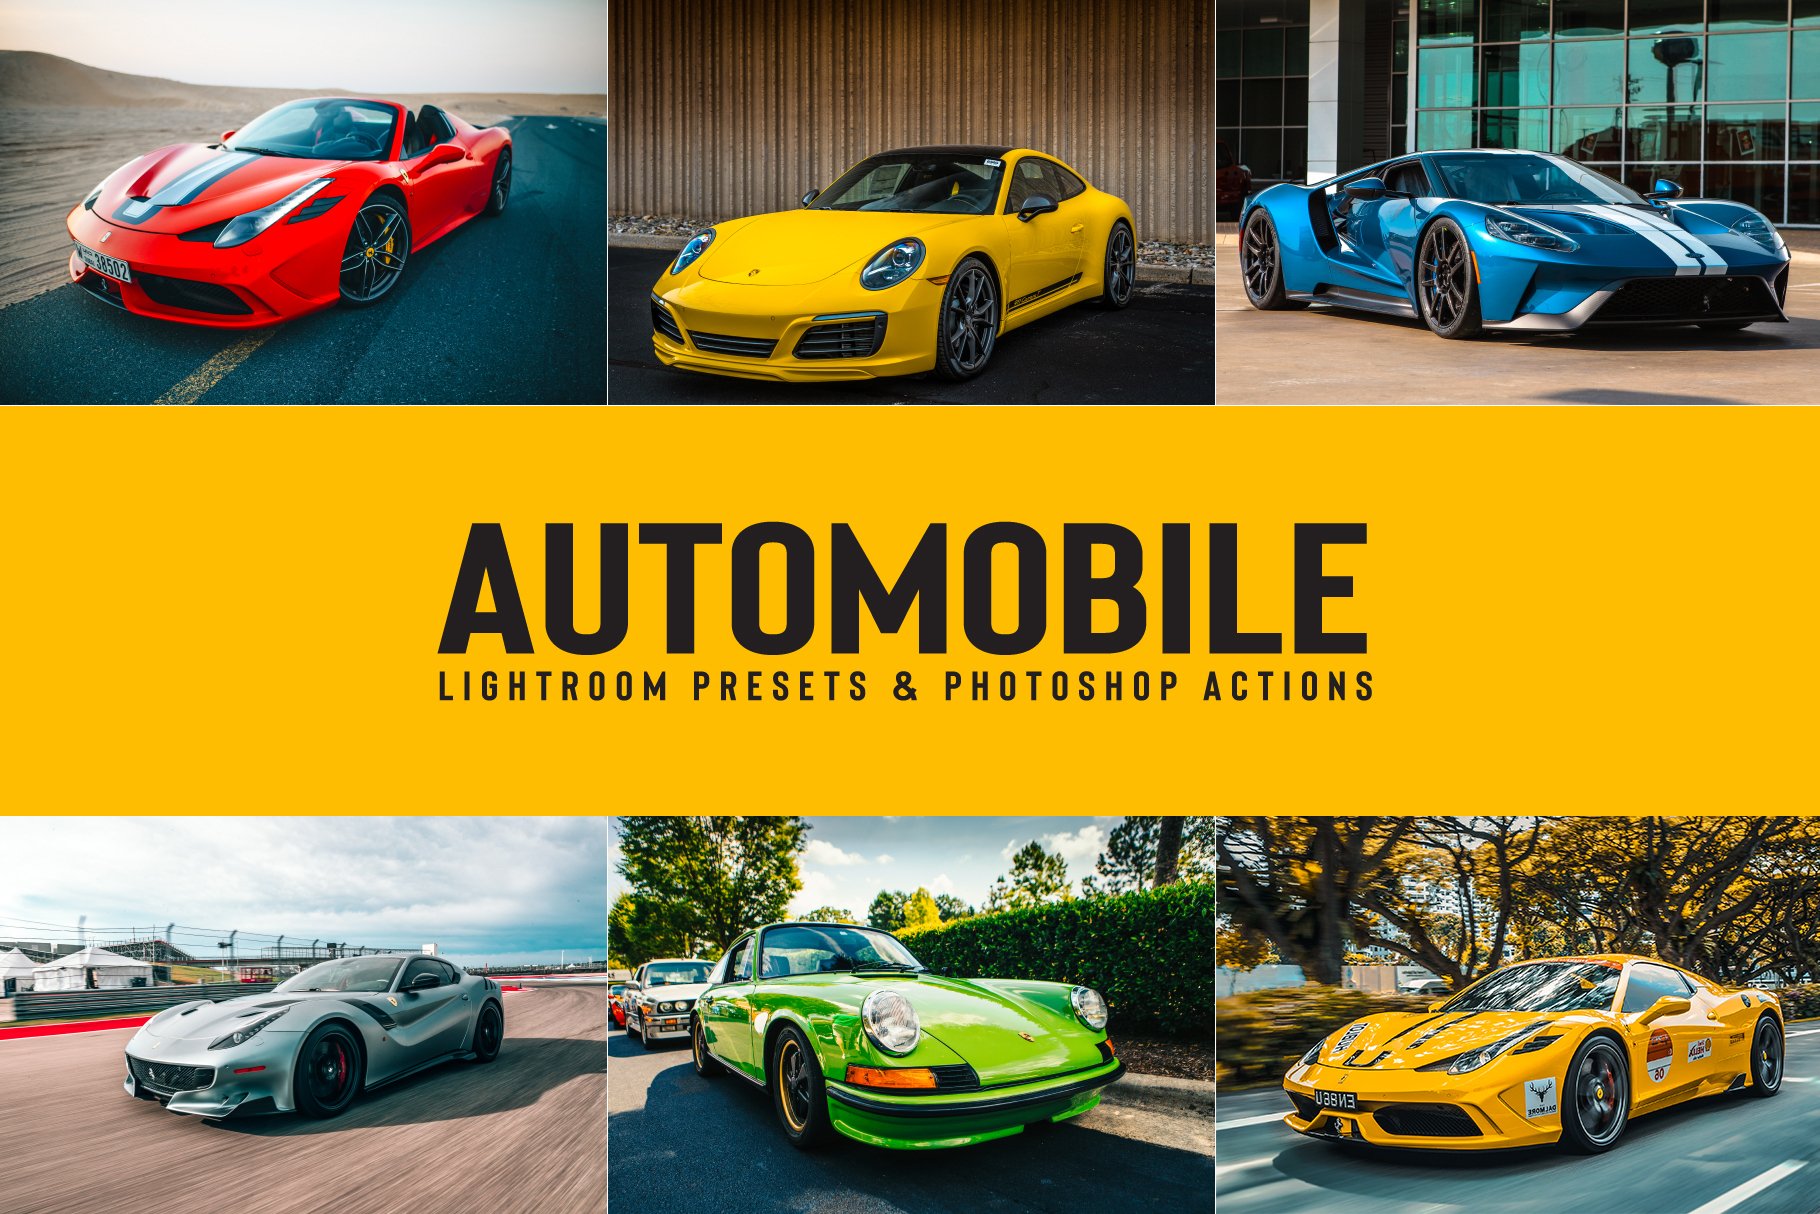 20 Automobile Presets & Actionscover image.